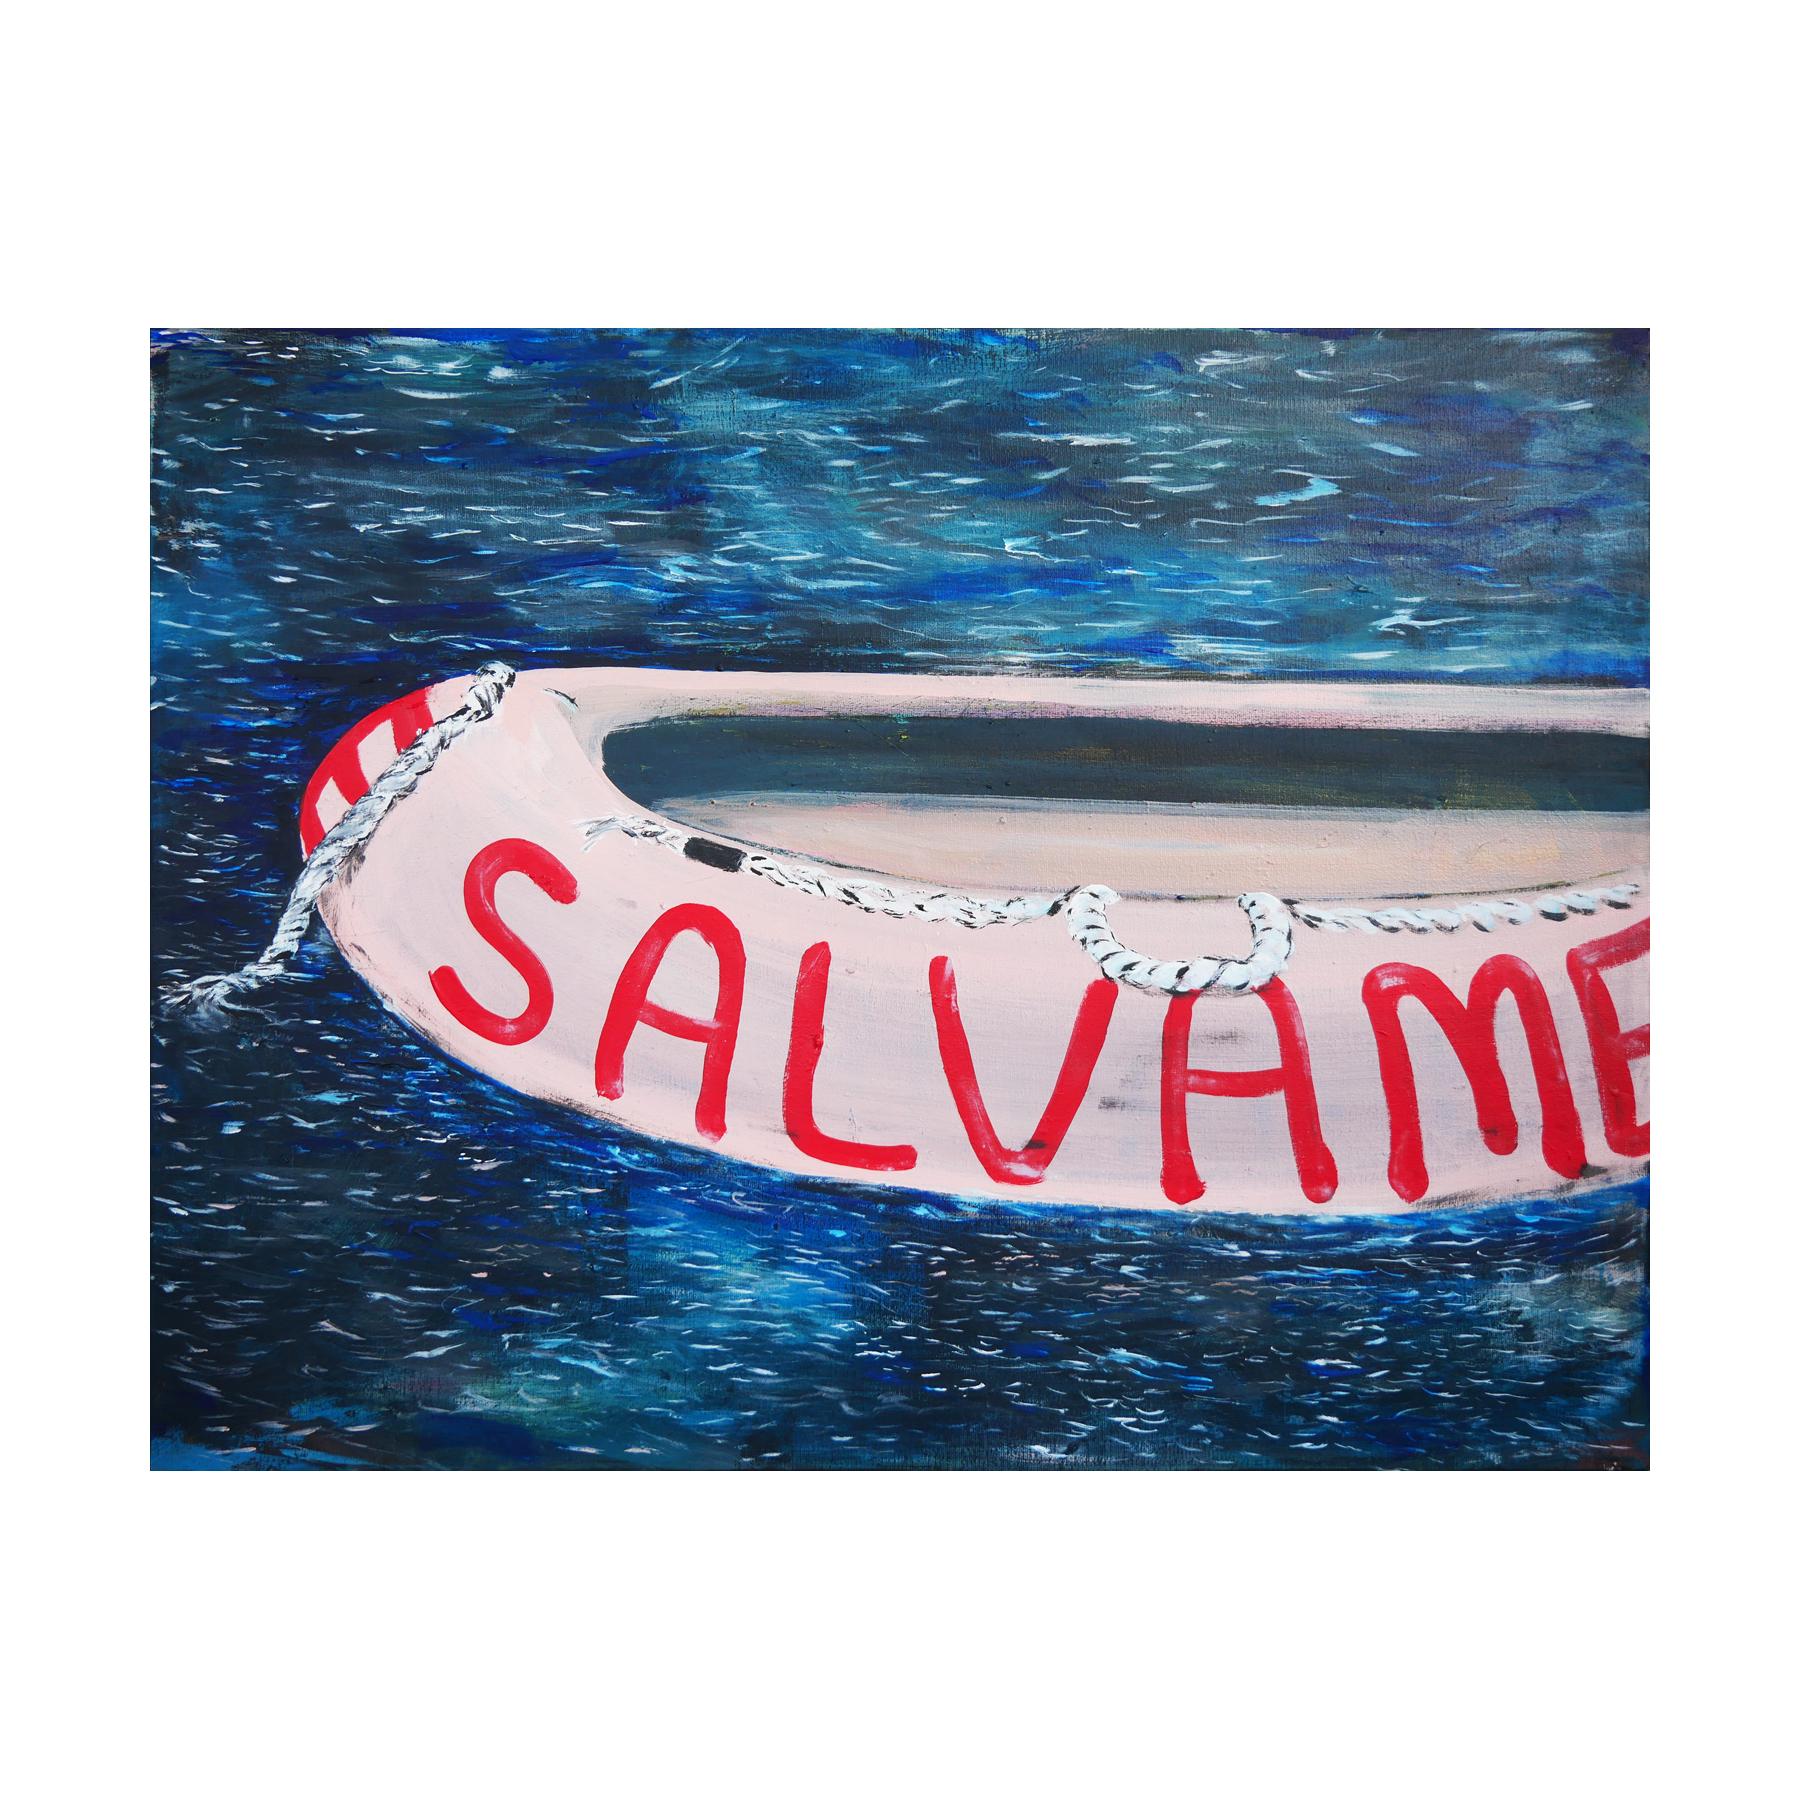 Blue and pink abstract contemporary seascape landscape by Houston, TX artist Moisés Villafuerte. This abstract painting features a large pink lifeboat with the text 